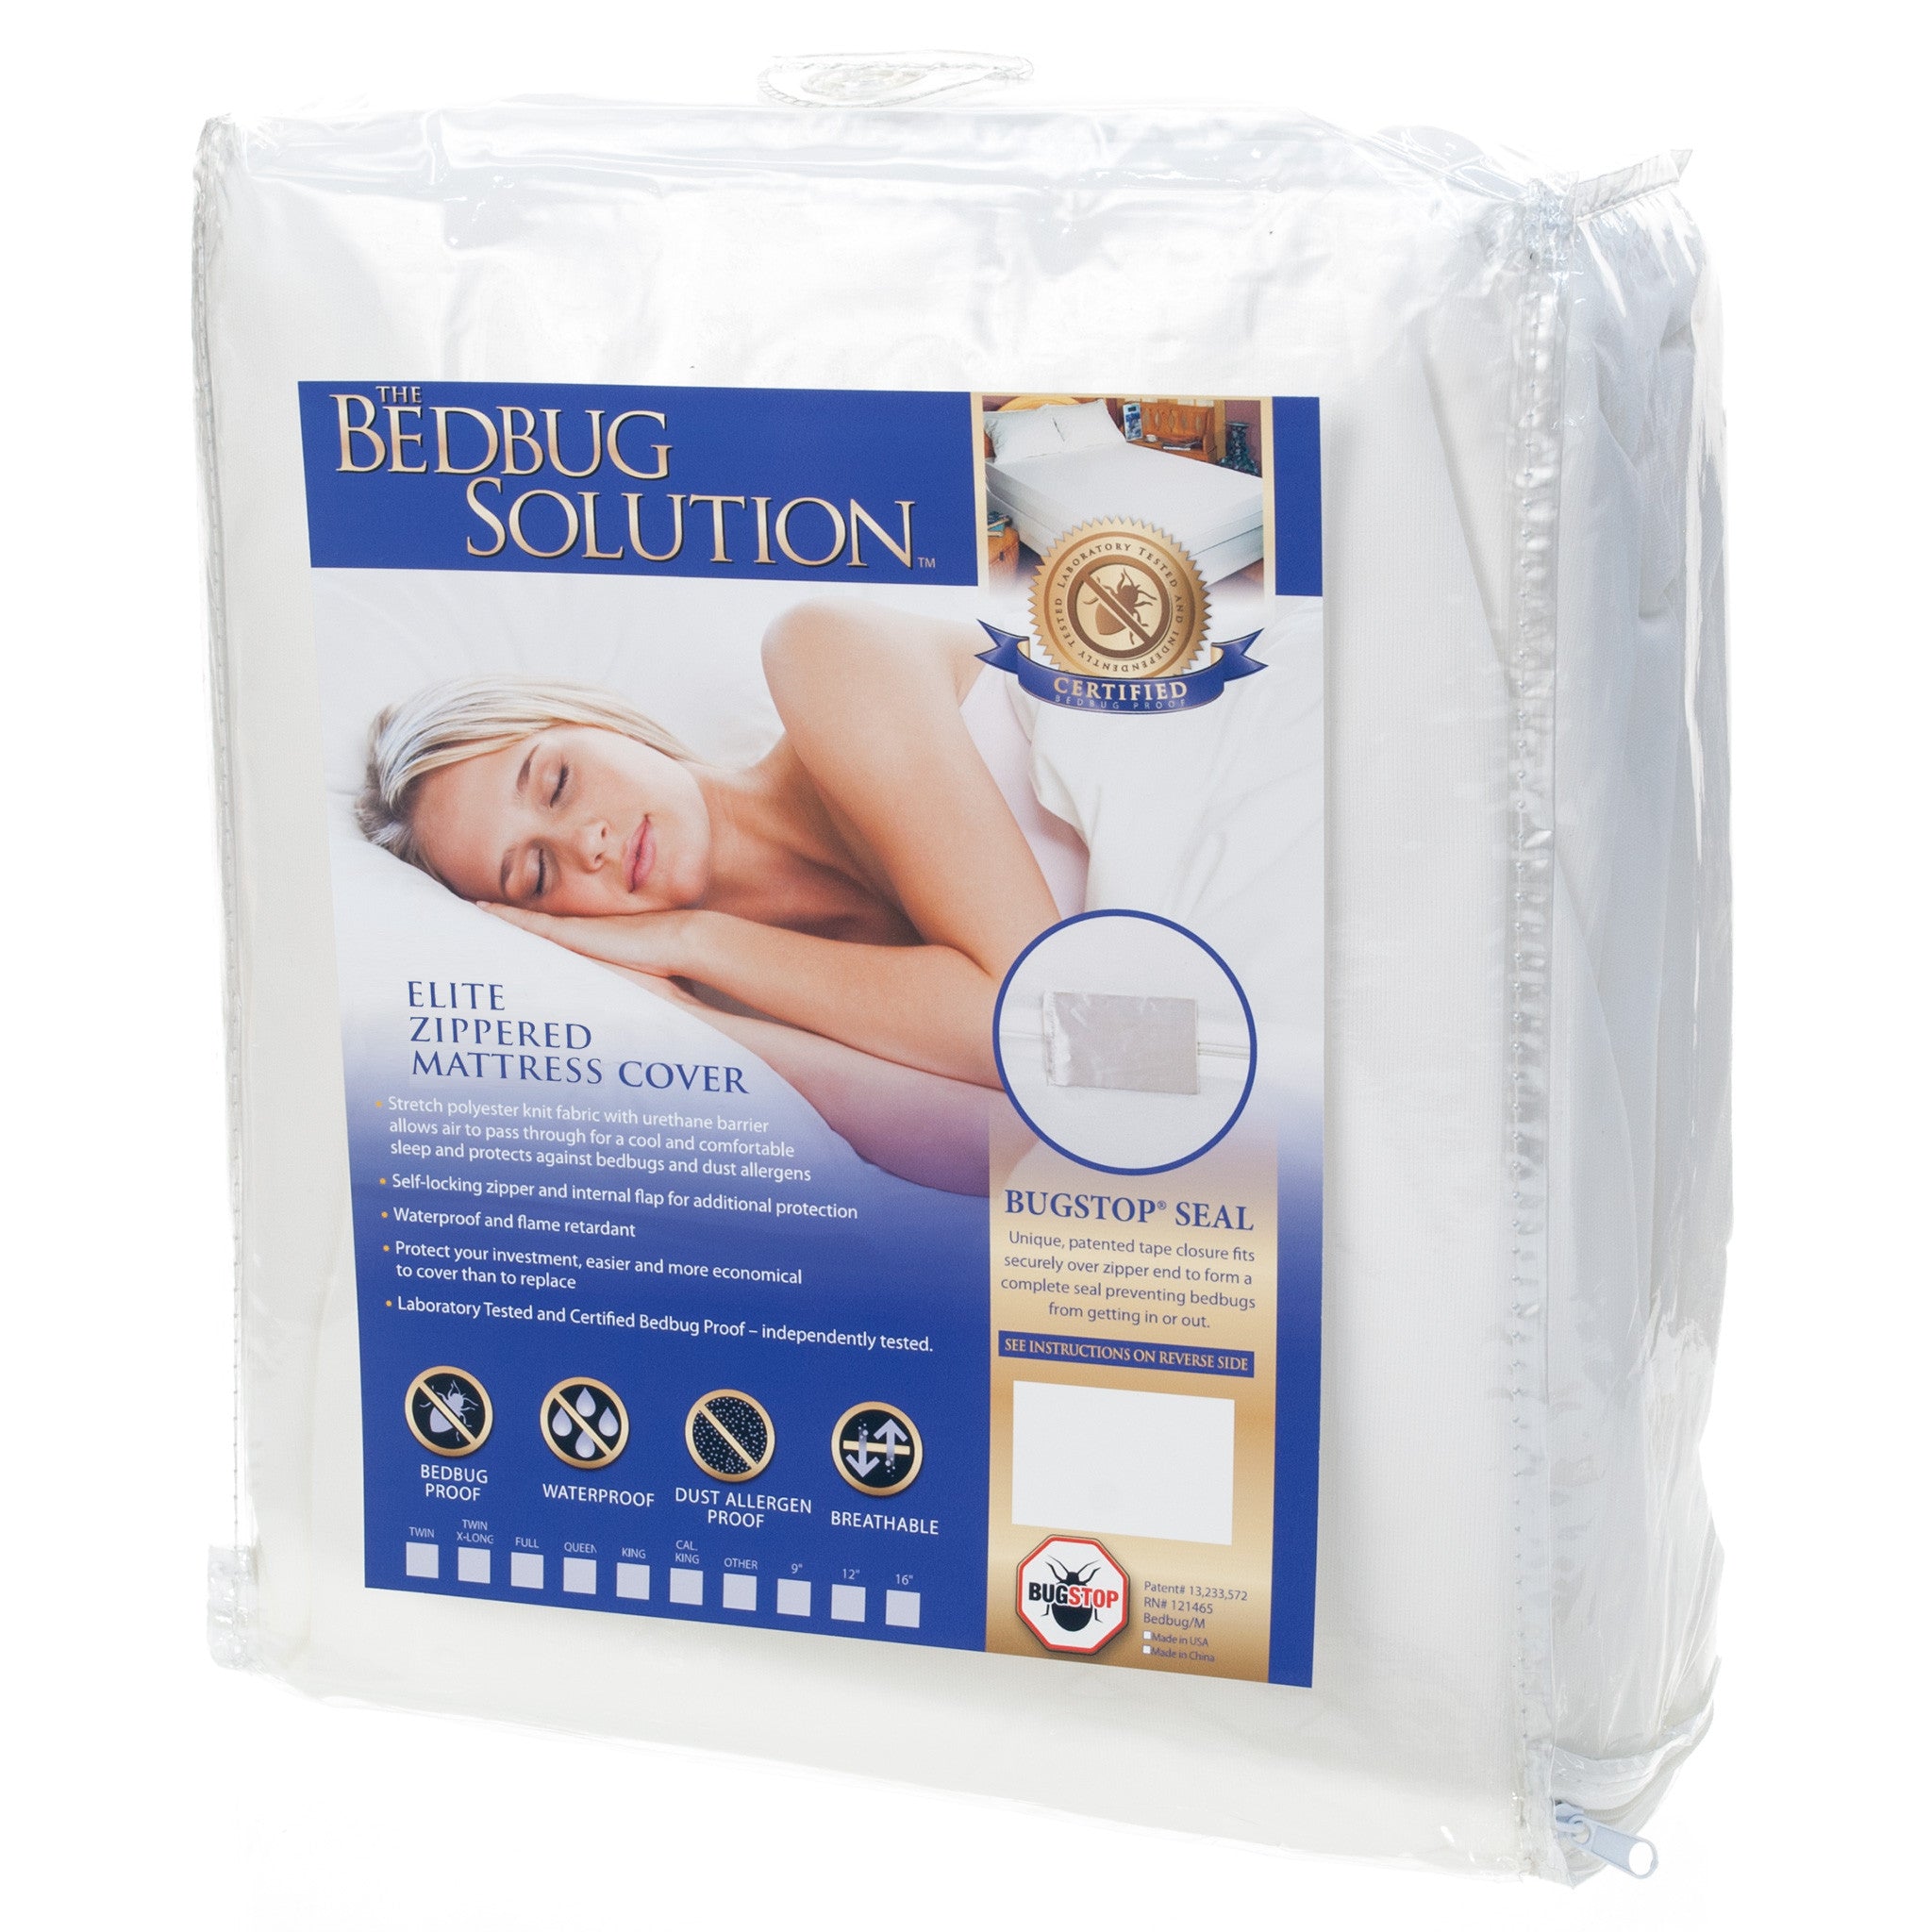 do bed bug mattress covers work